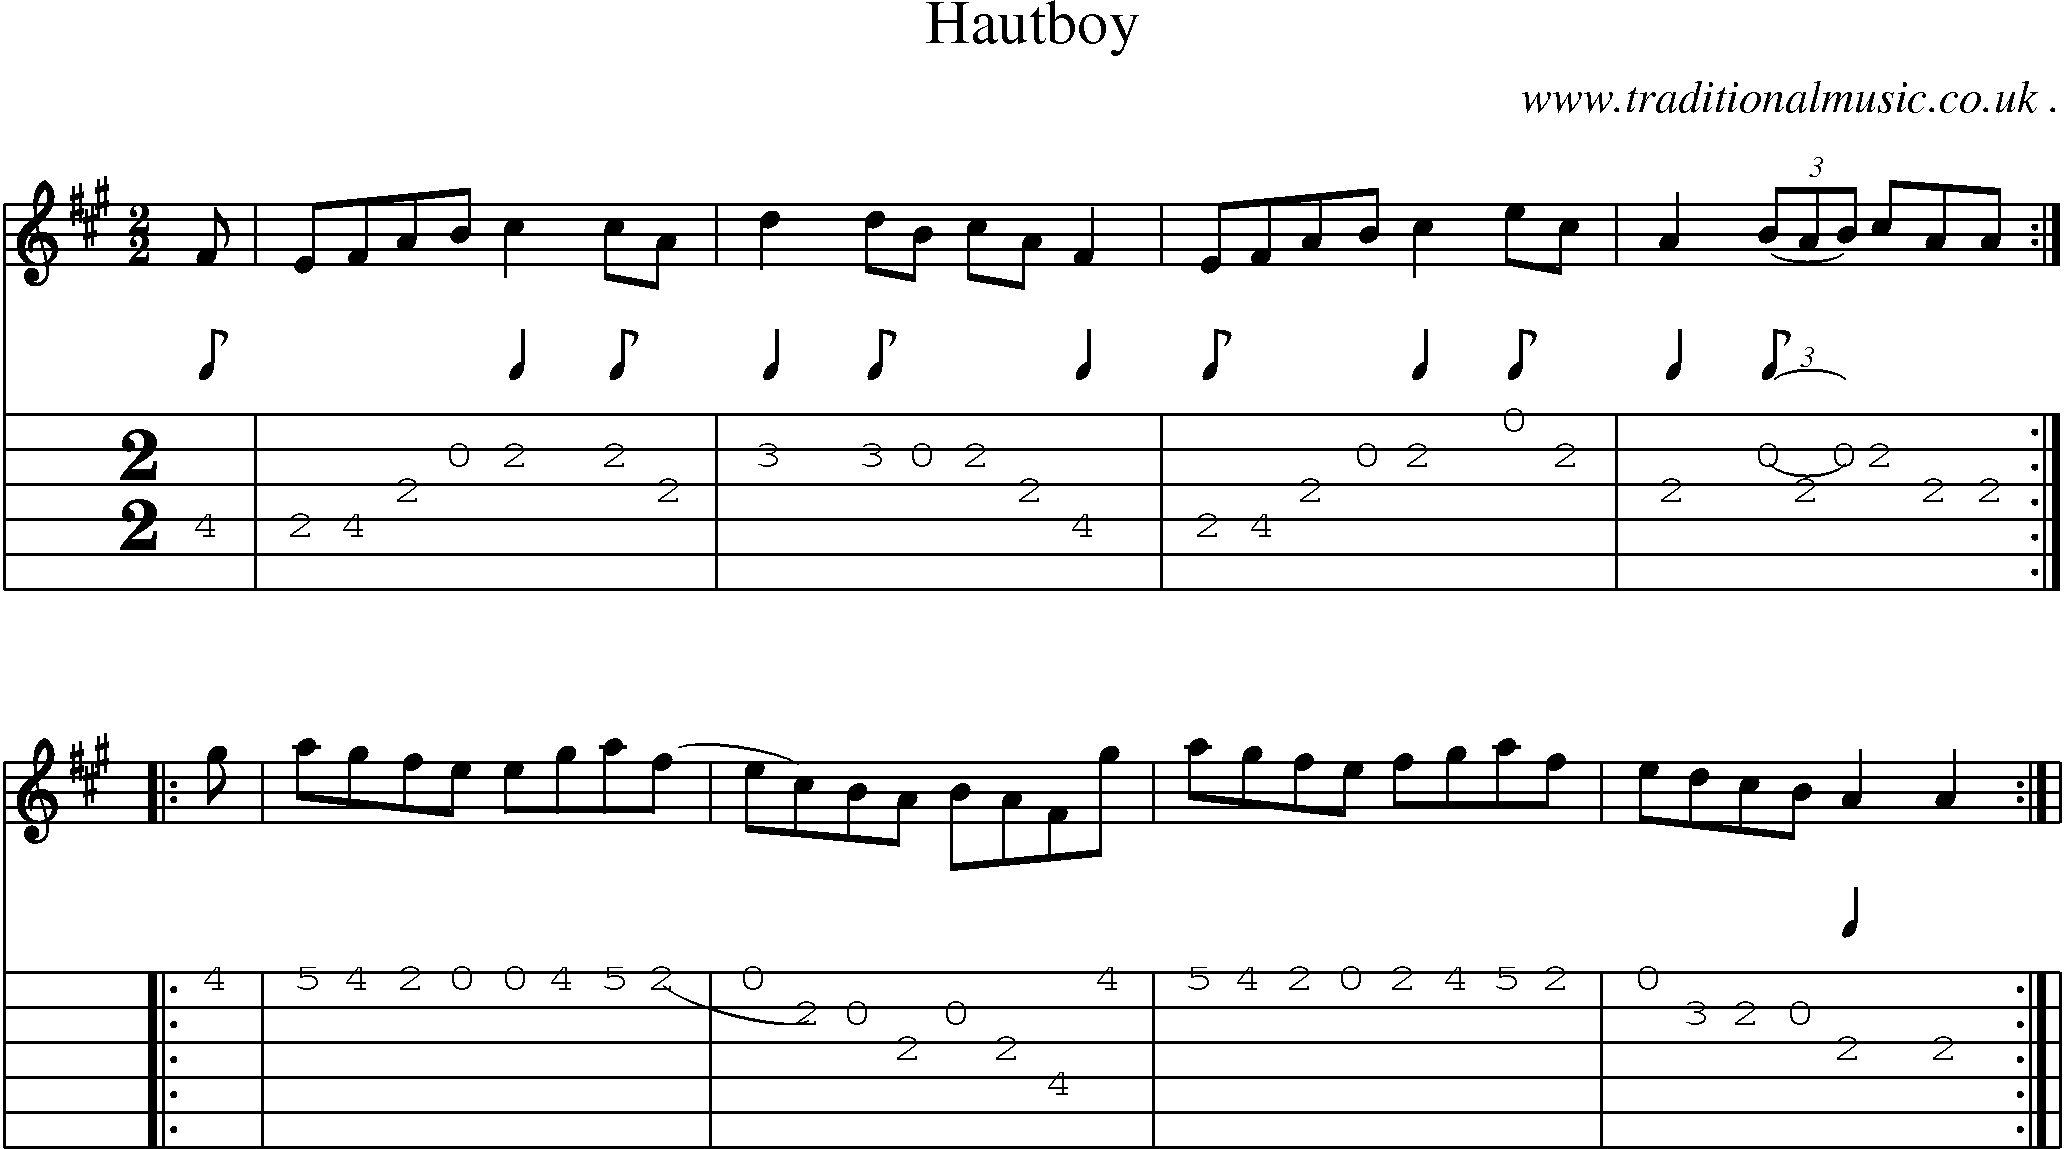 Sheet-Music and Guitar Tabs for Hautboy